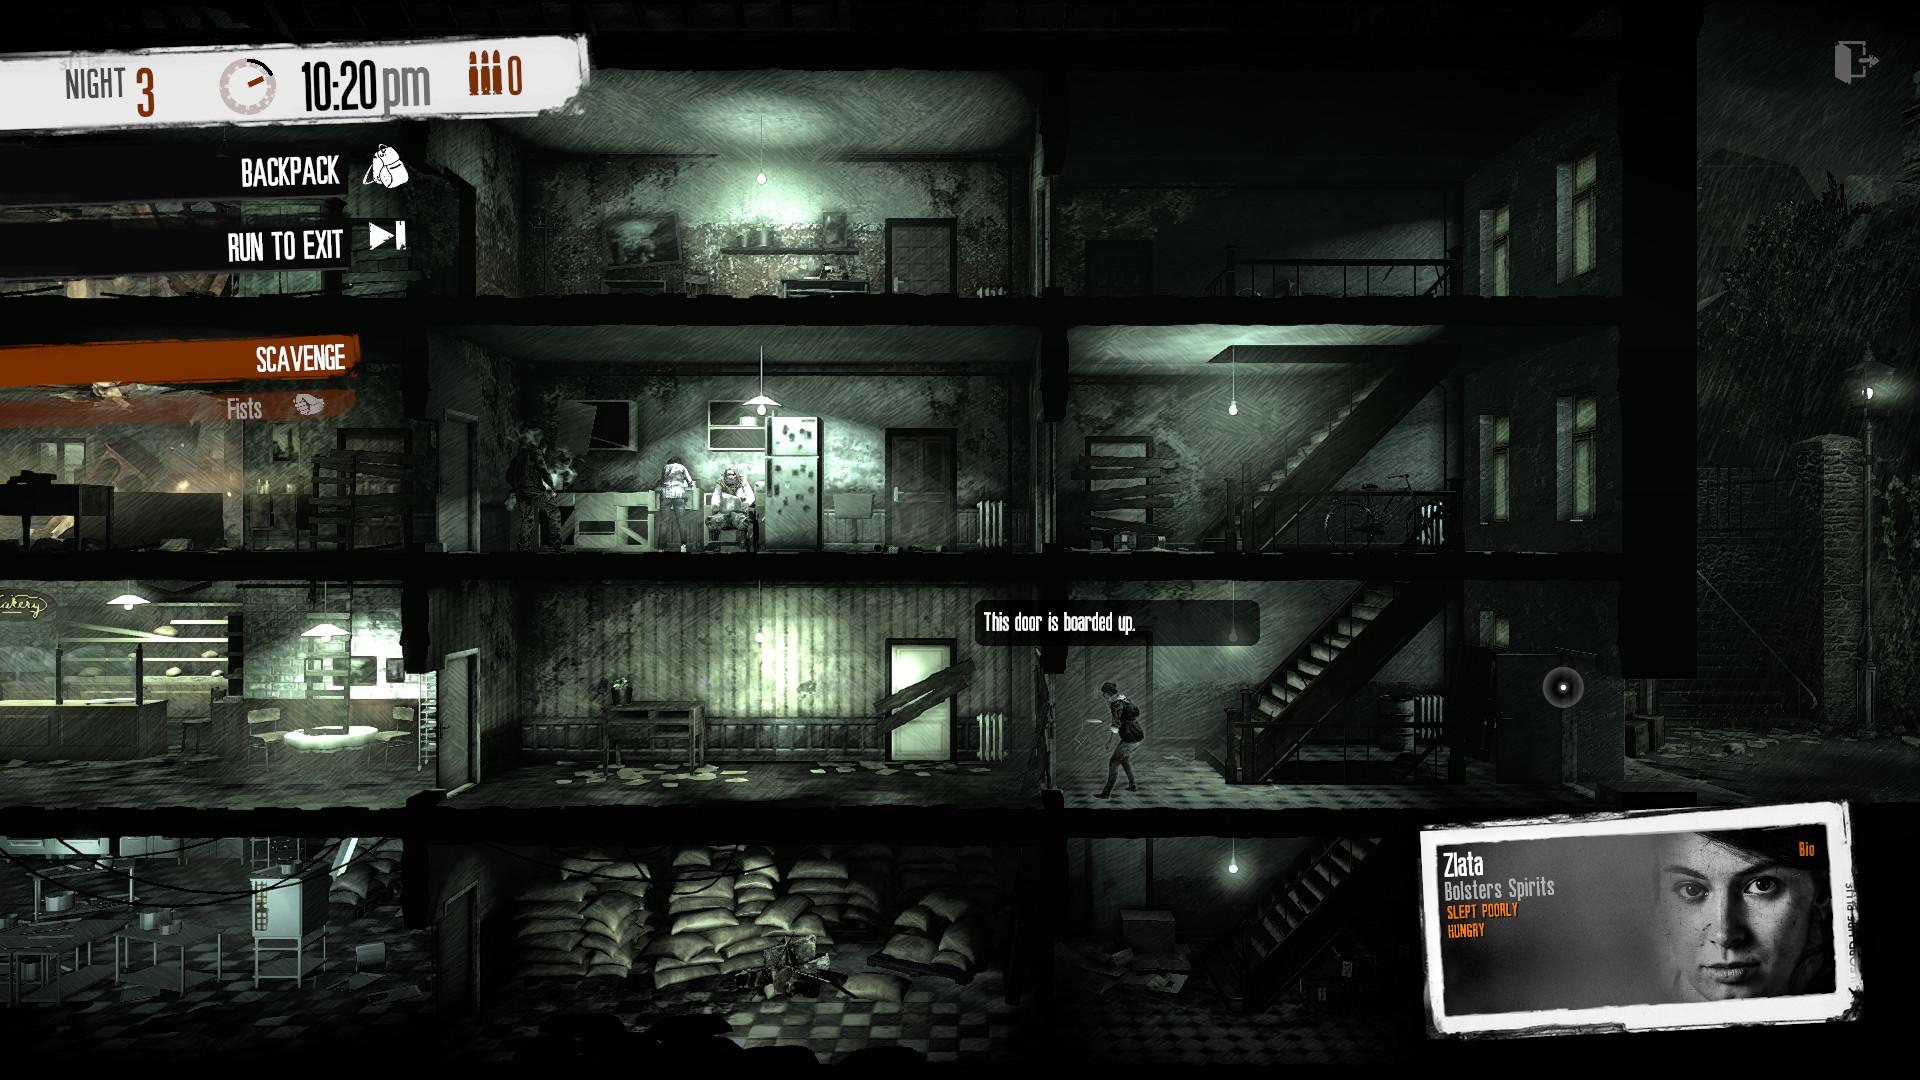 Screenshot №4 from game This War of Mine